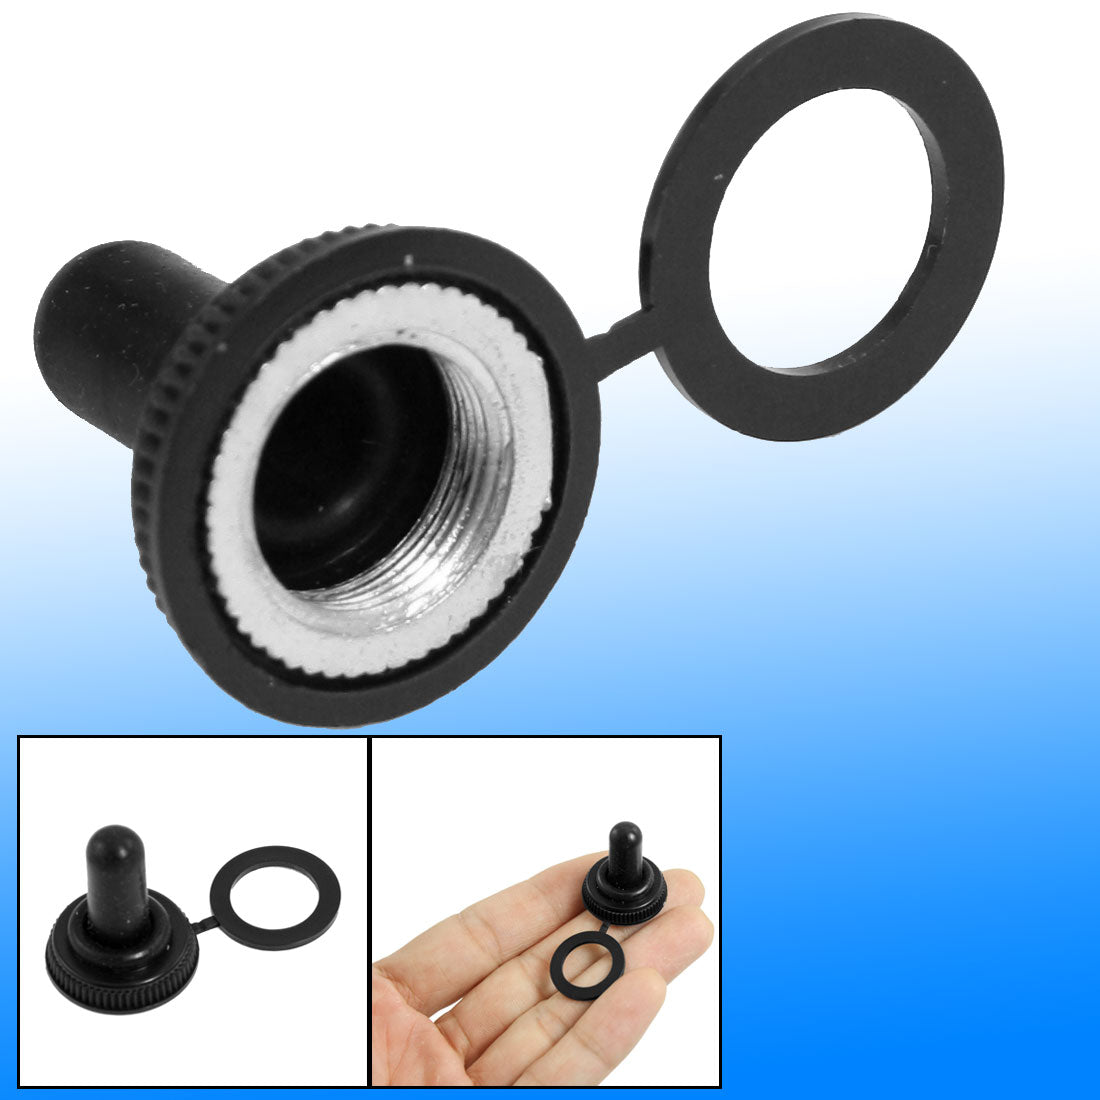 uxcell Uxcell 11mm 7/16" Threaded Waterproof Toggle Switch Rubber Cover Cap Seal